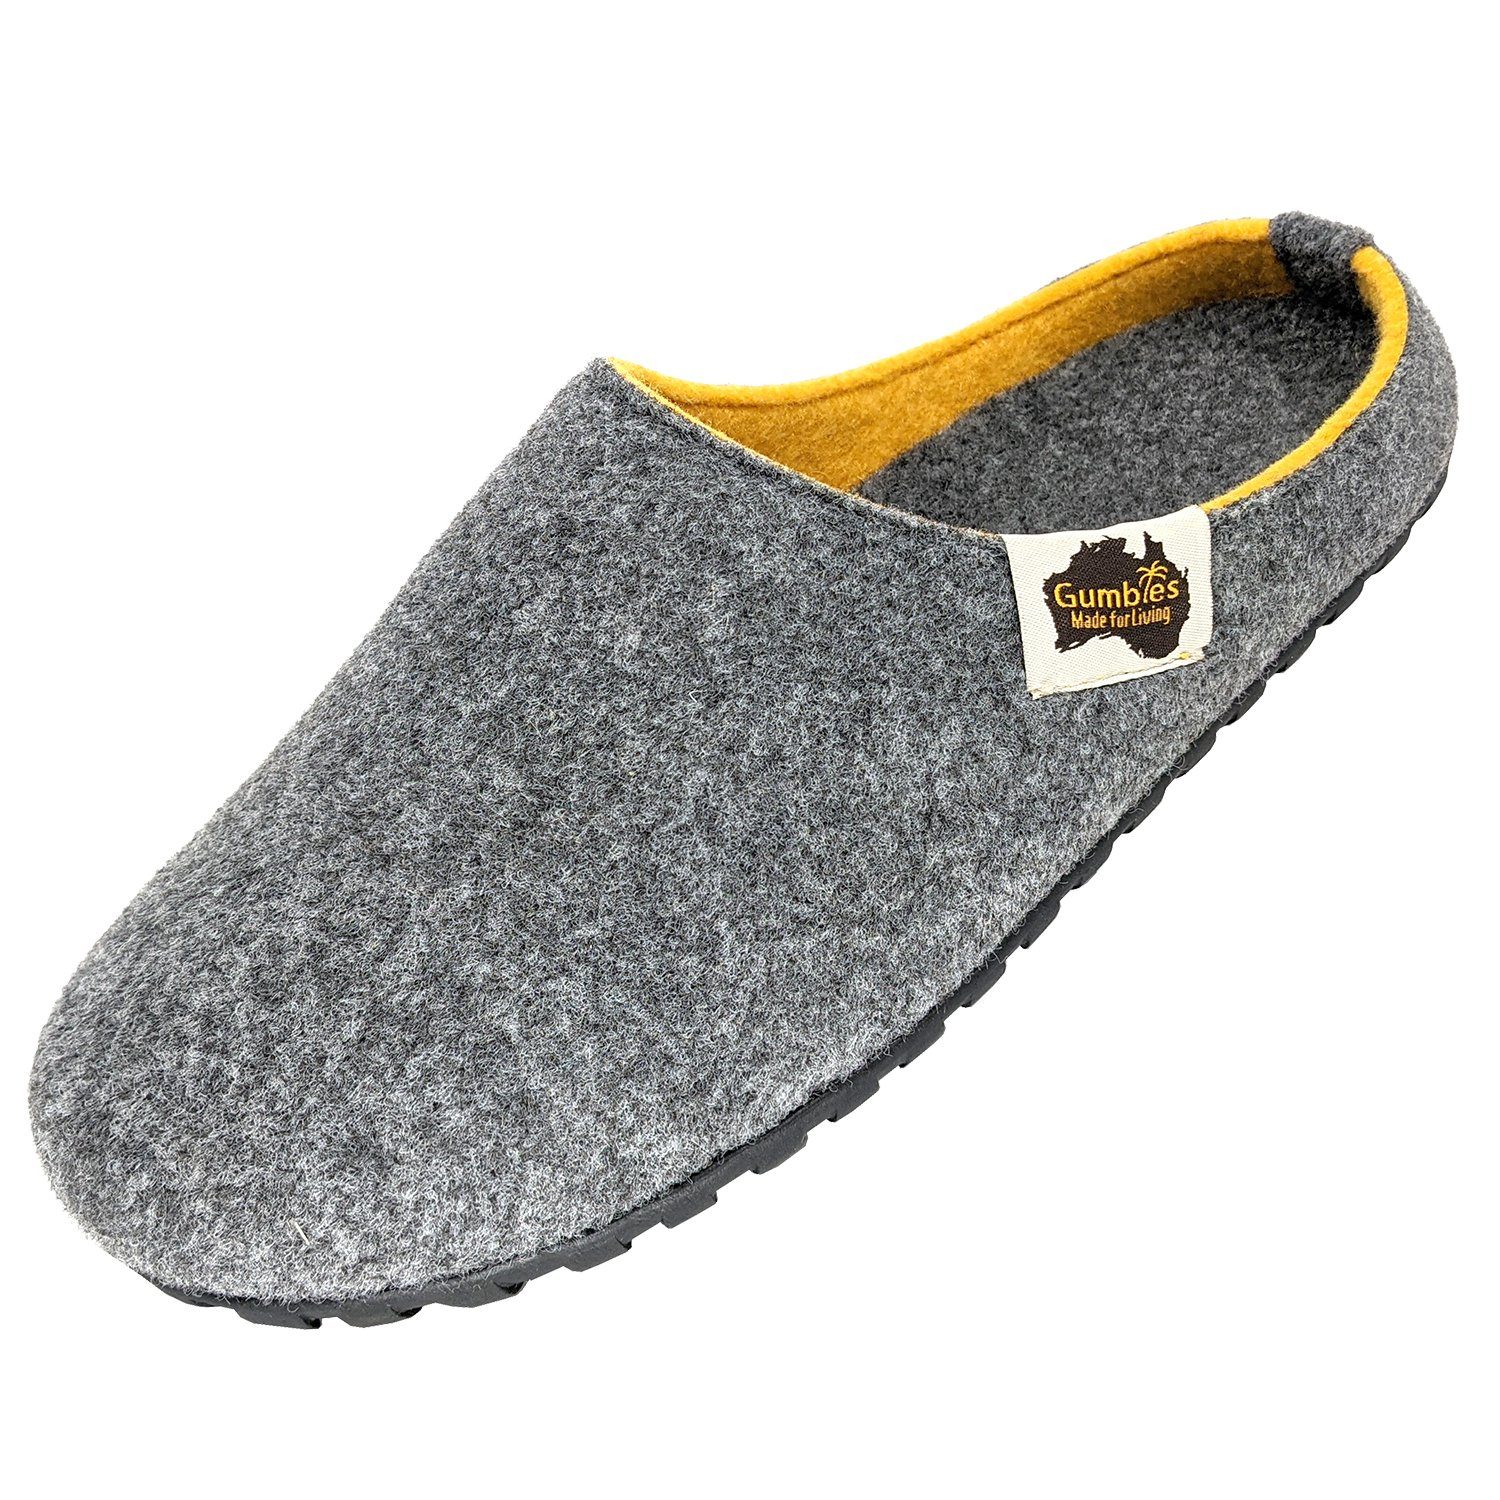 Gumbies Outback Slipper in Grey-Curry Hausschuh aus recycelten Materialien »in farbenfrohen Designs«